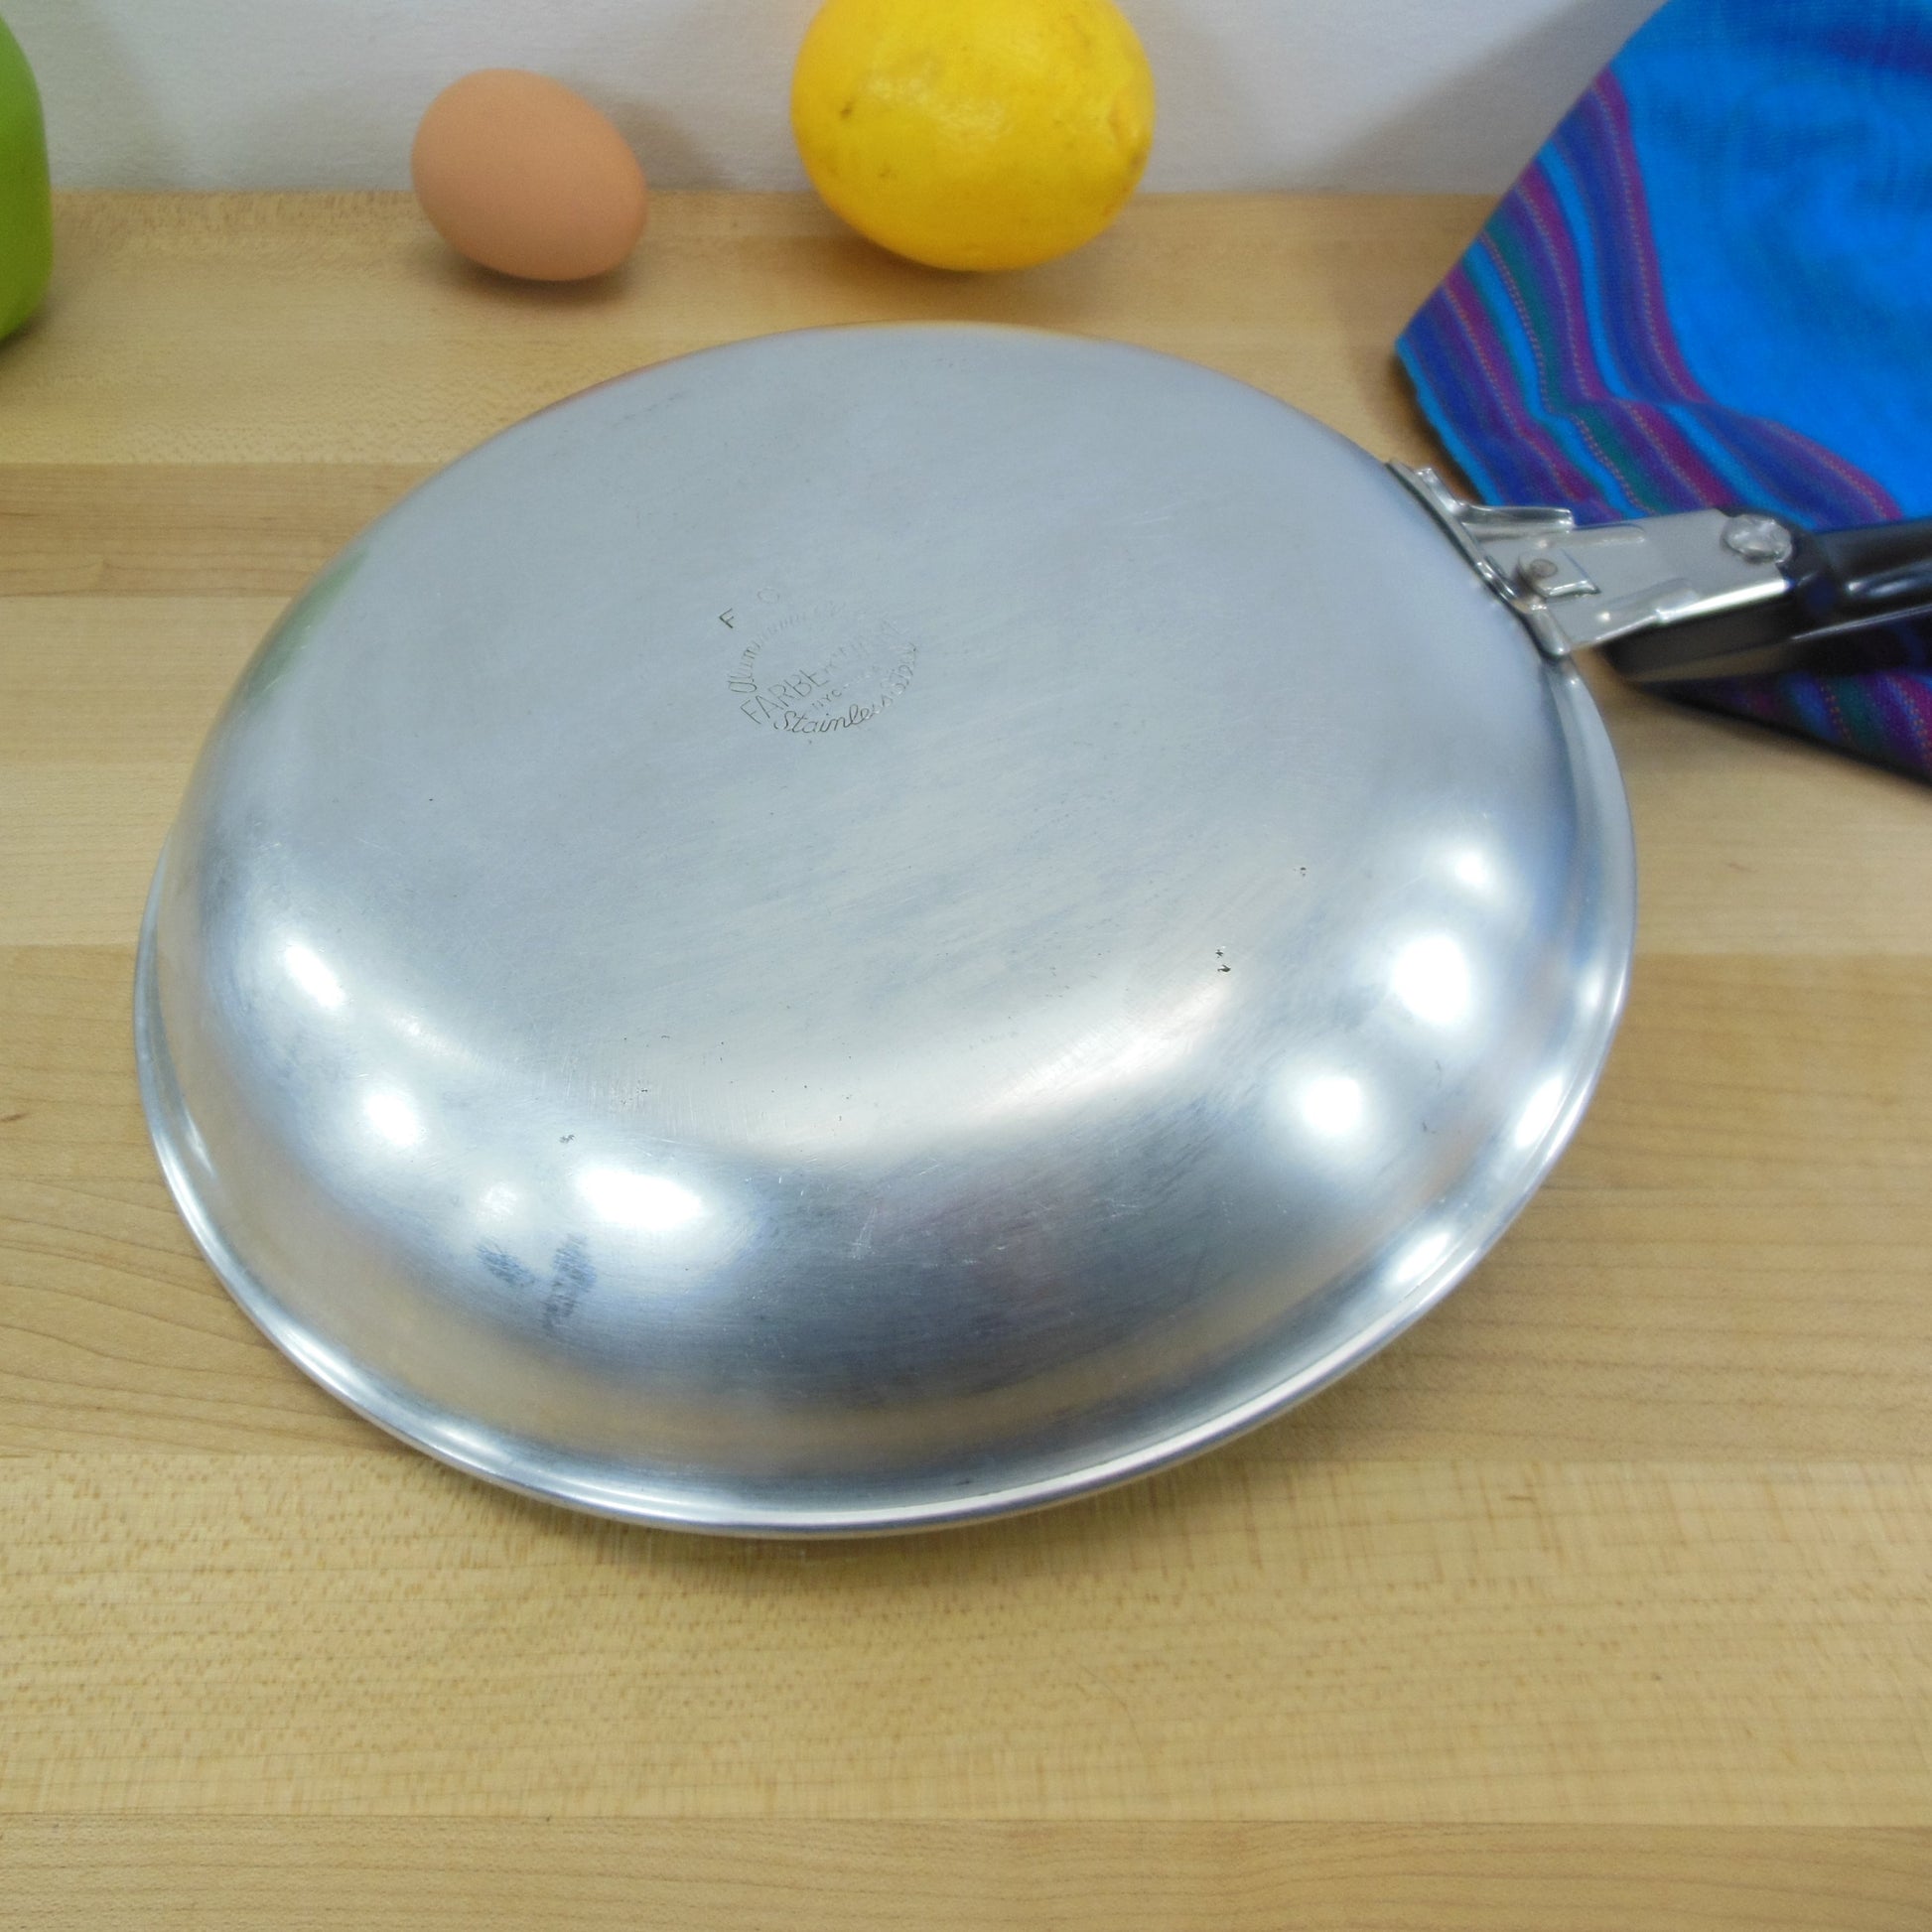 Farberware Omelet Chef Pan Skillet - Aluminum Clad Stainless 8" Used